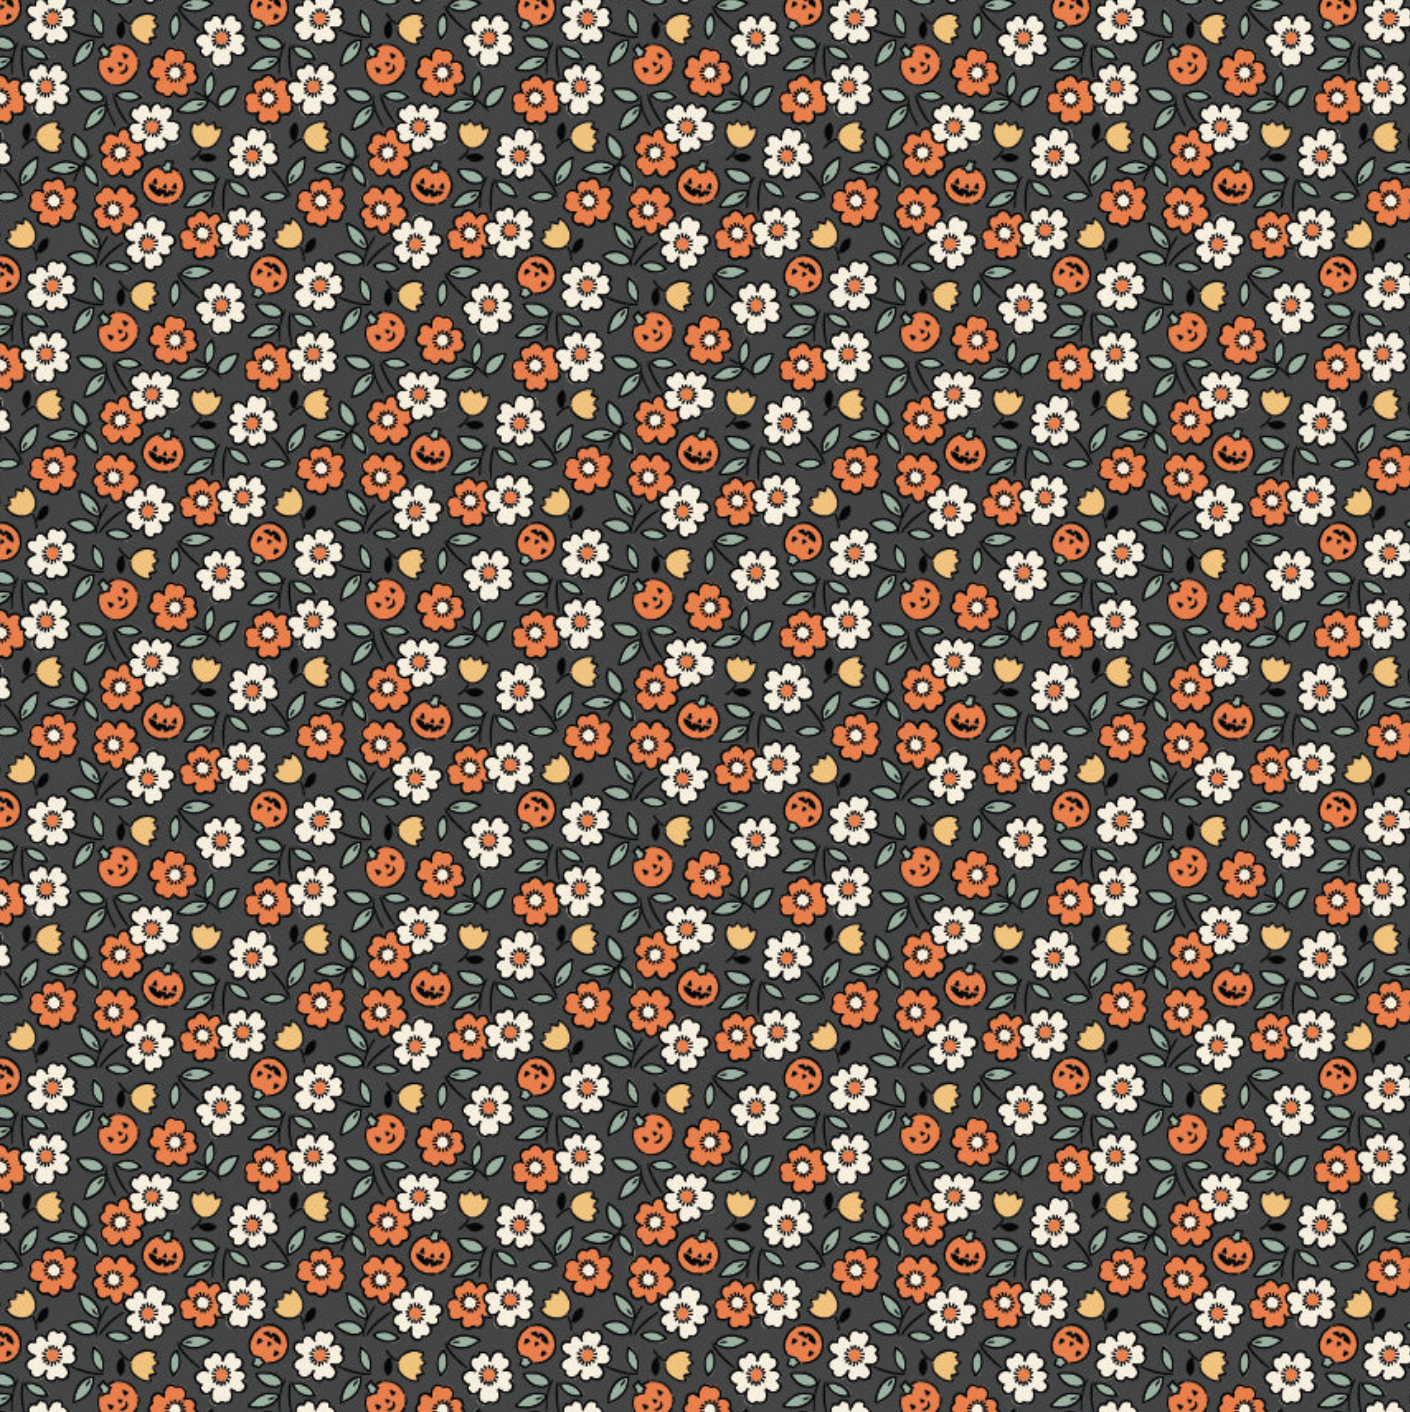 Sweet Tooth, Pumpkin Blossoms Black, ST24322, sold by the 1/2 yard, *PREORDER!